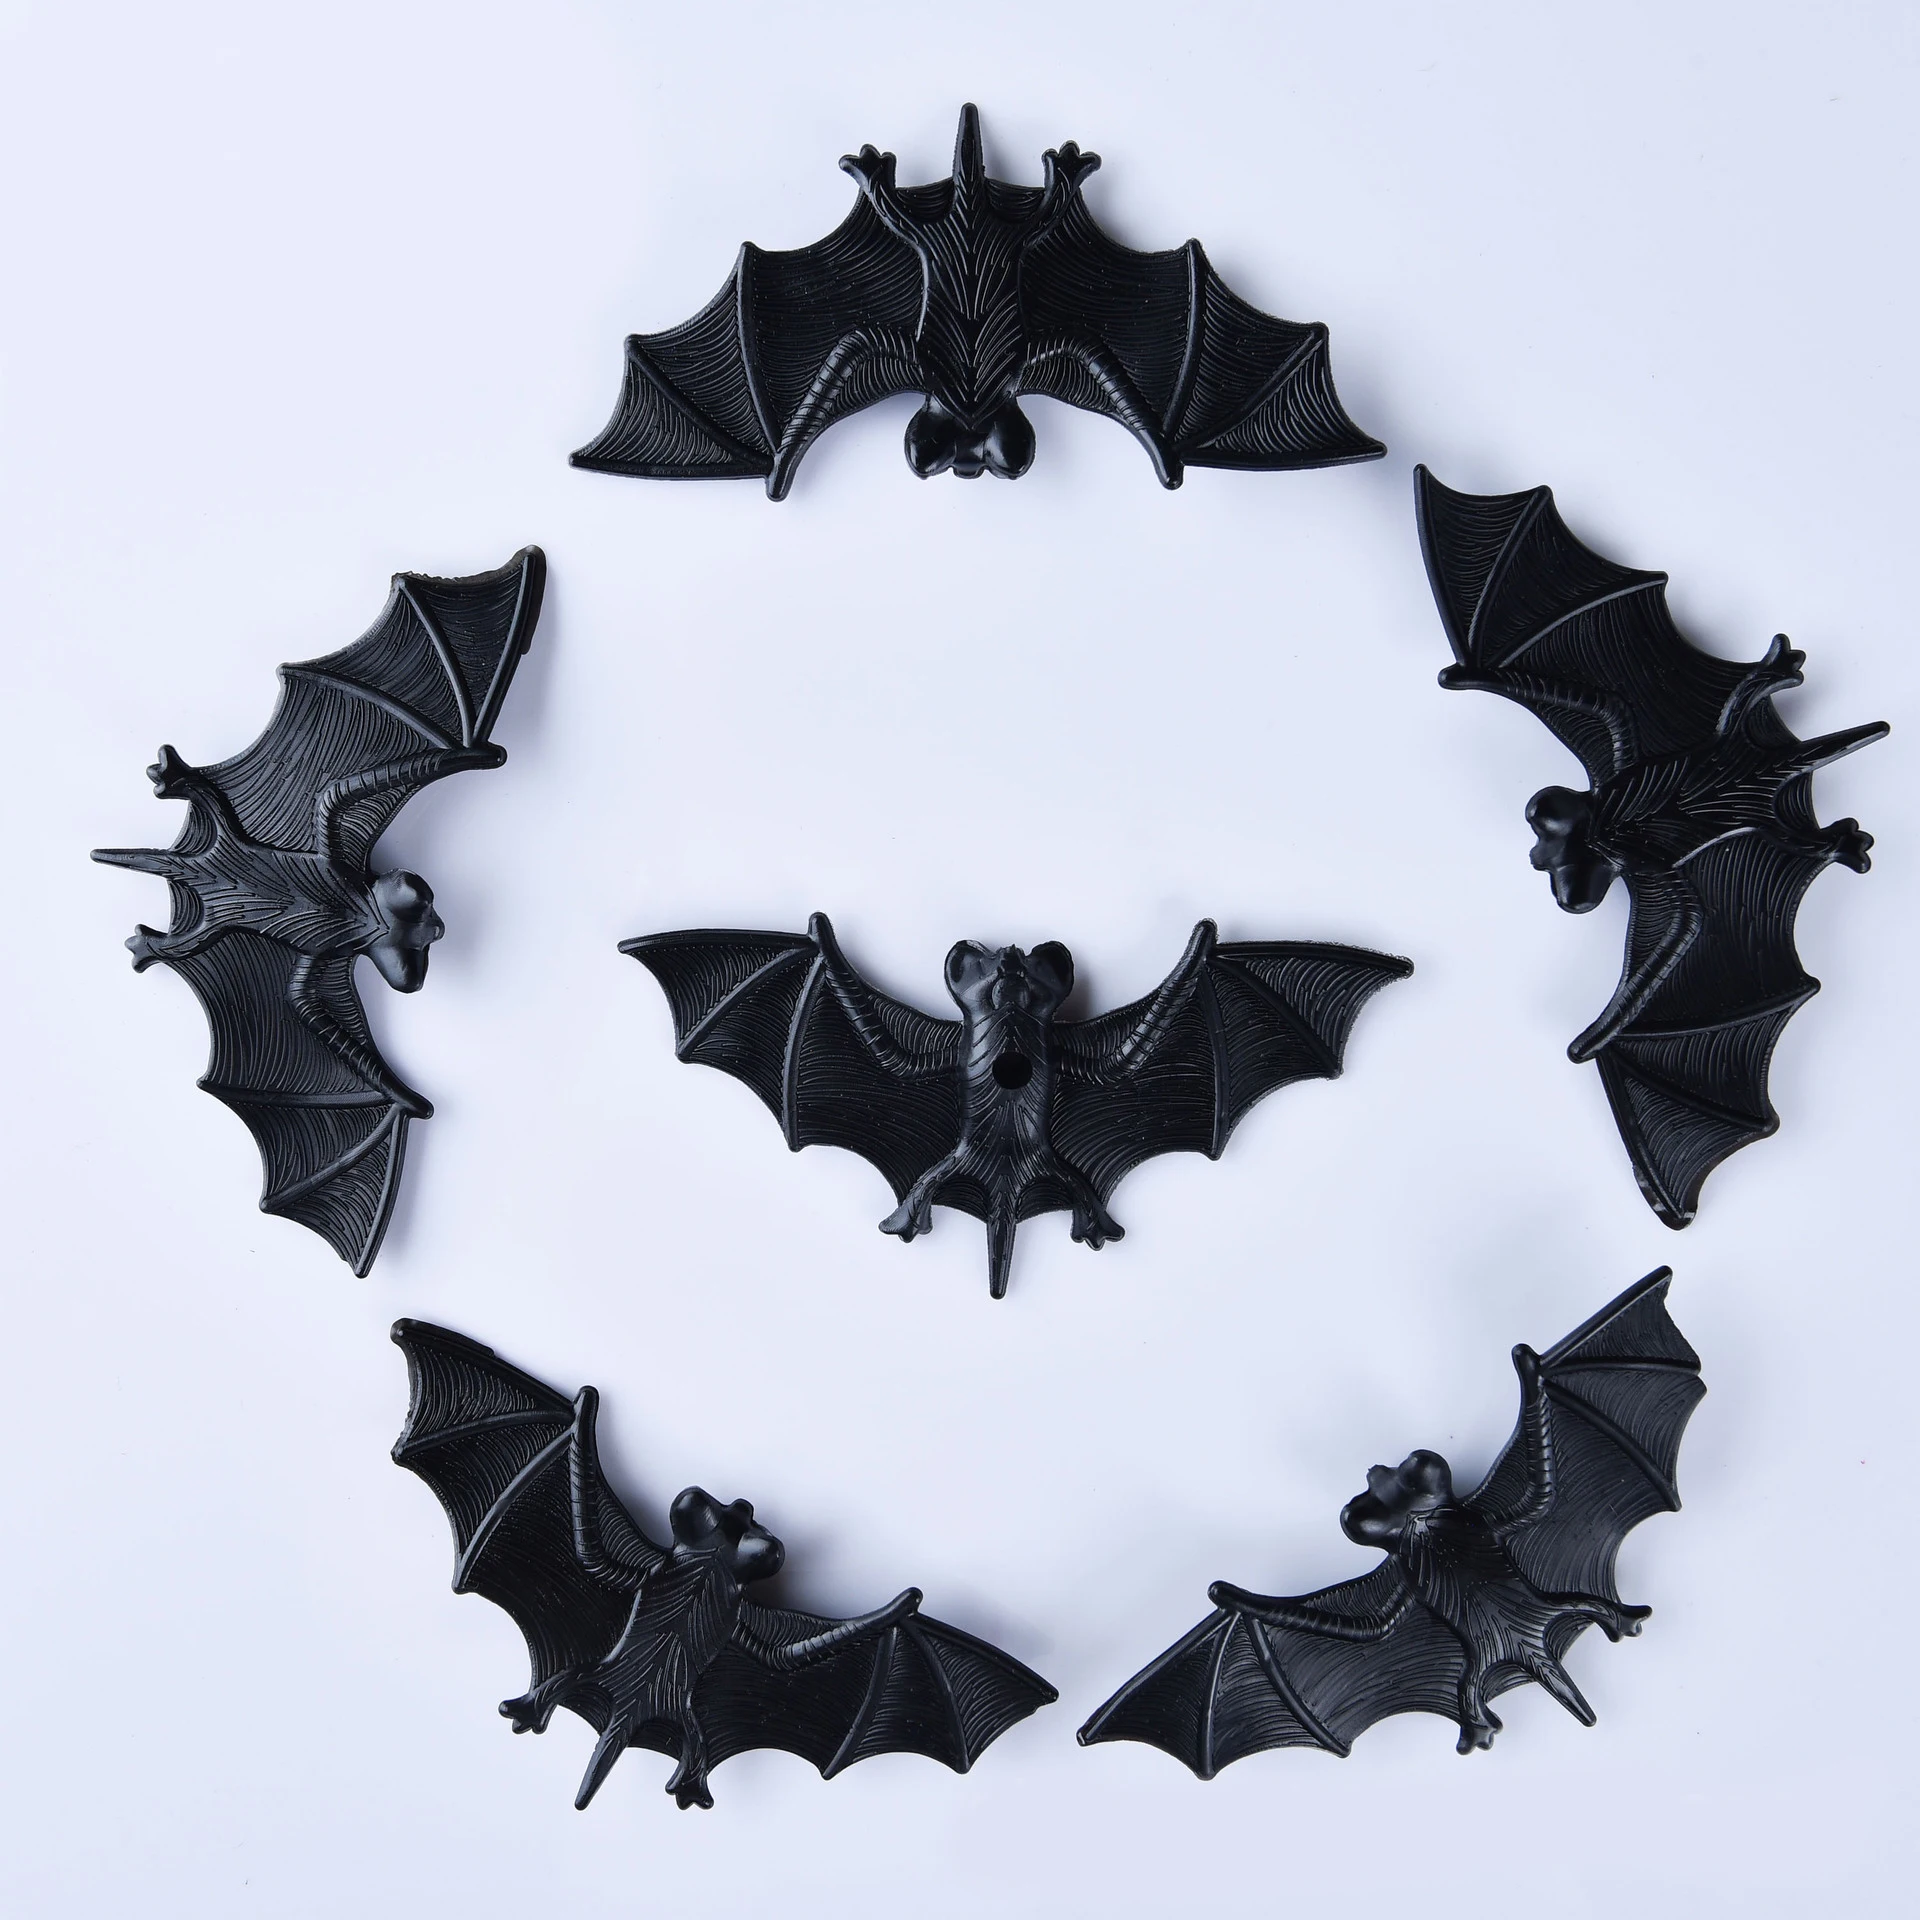 

10/20PCS Simulation Bat Model Halloween Tricky Props Realistic Plastic Bat Insect Prank Horror Funny Trick Toy Decorations Gift